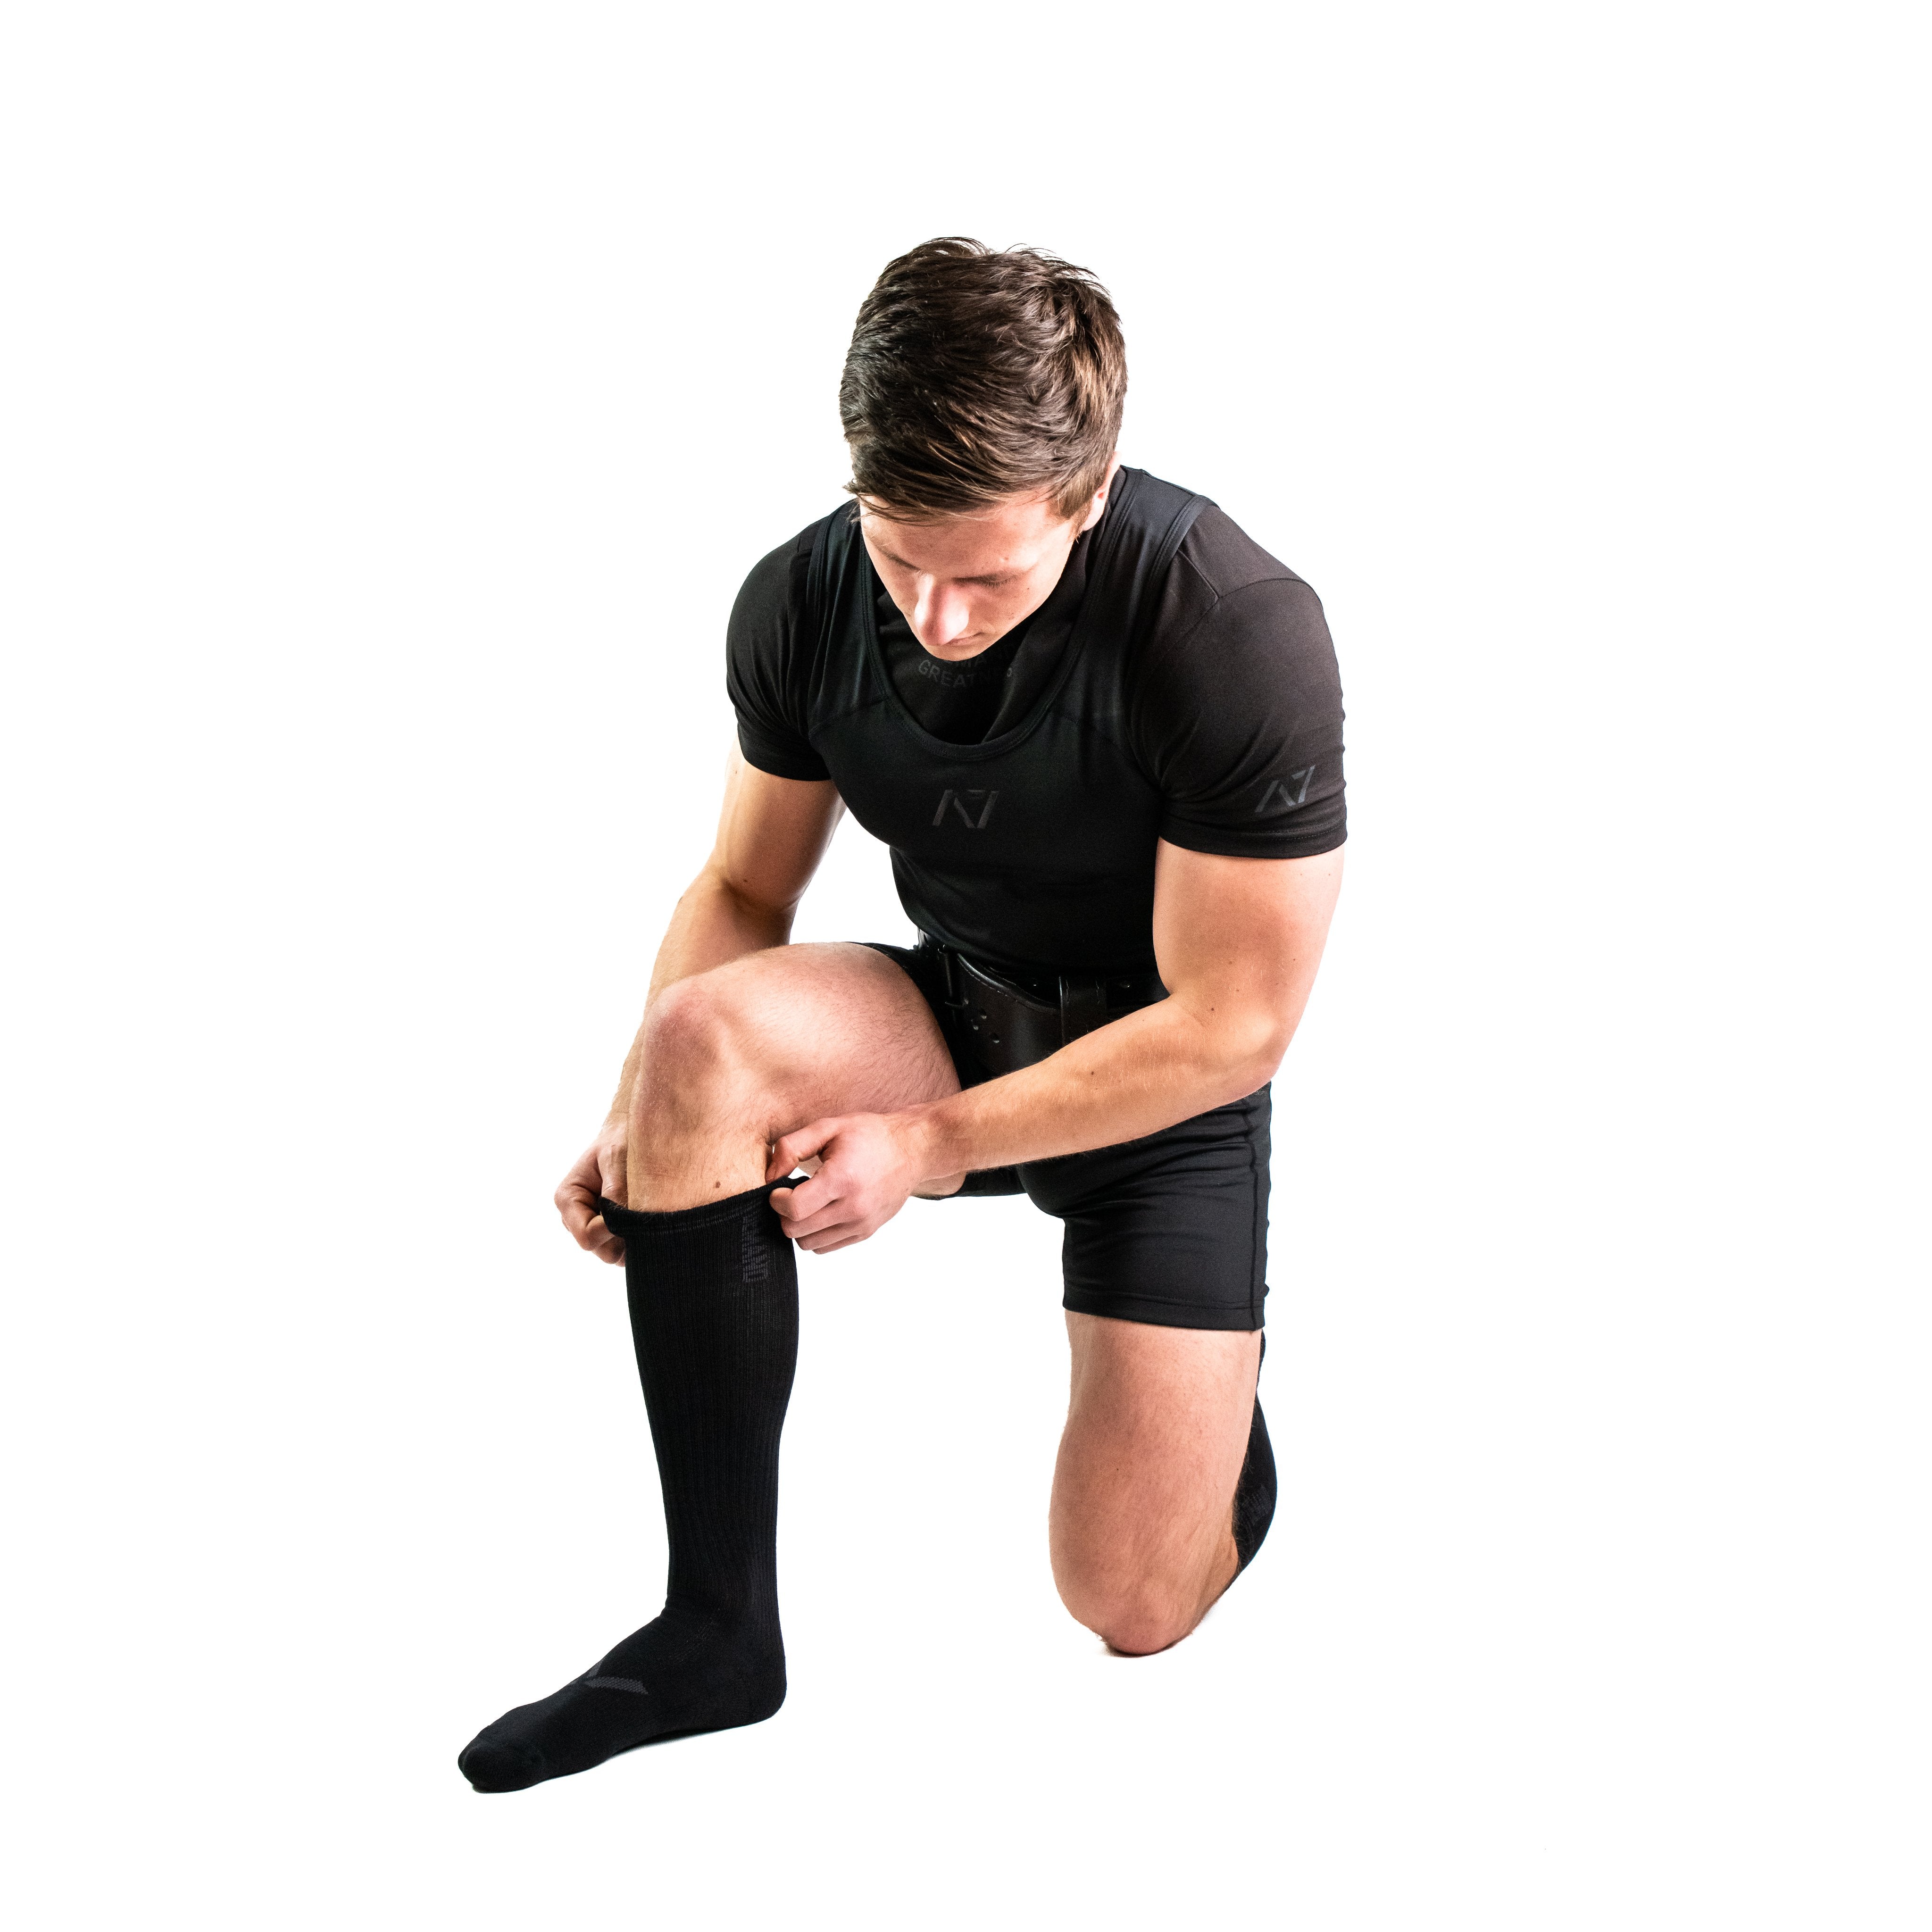 This Stealth Deadlift socks were created with muted out the logos and keep contrast at a minimum and let your energy show on the platform, in your training or while out and about. A colourway that lets your performance and dedication remain the focus while still providing the level of quality, support and comfort you demand from your products